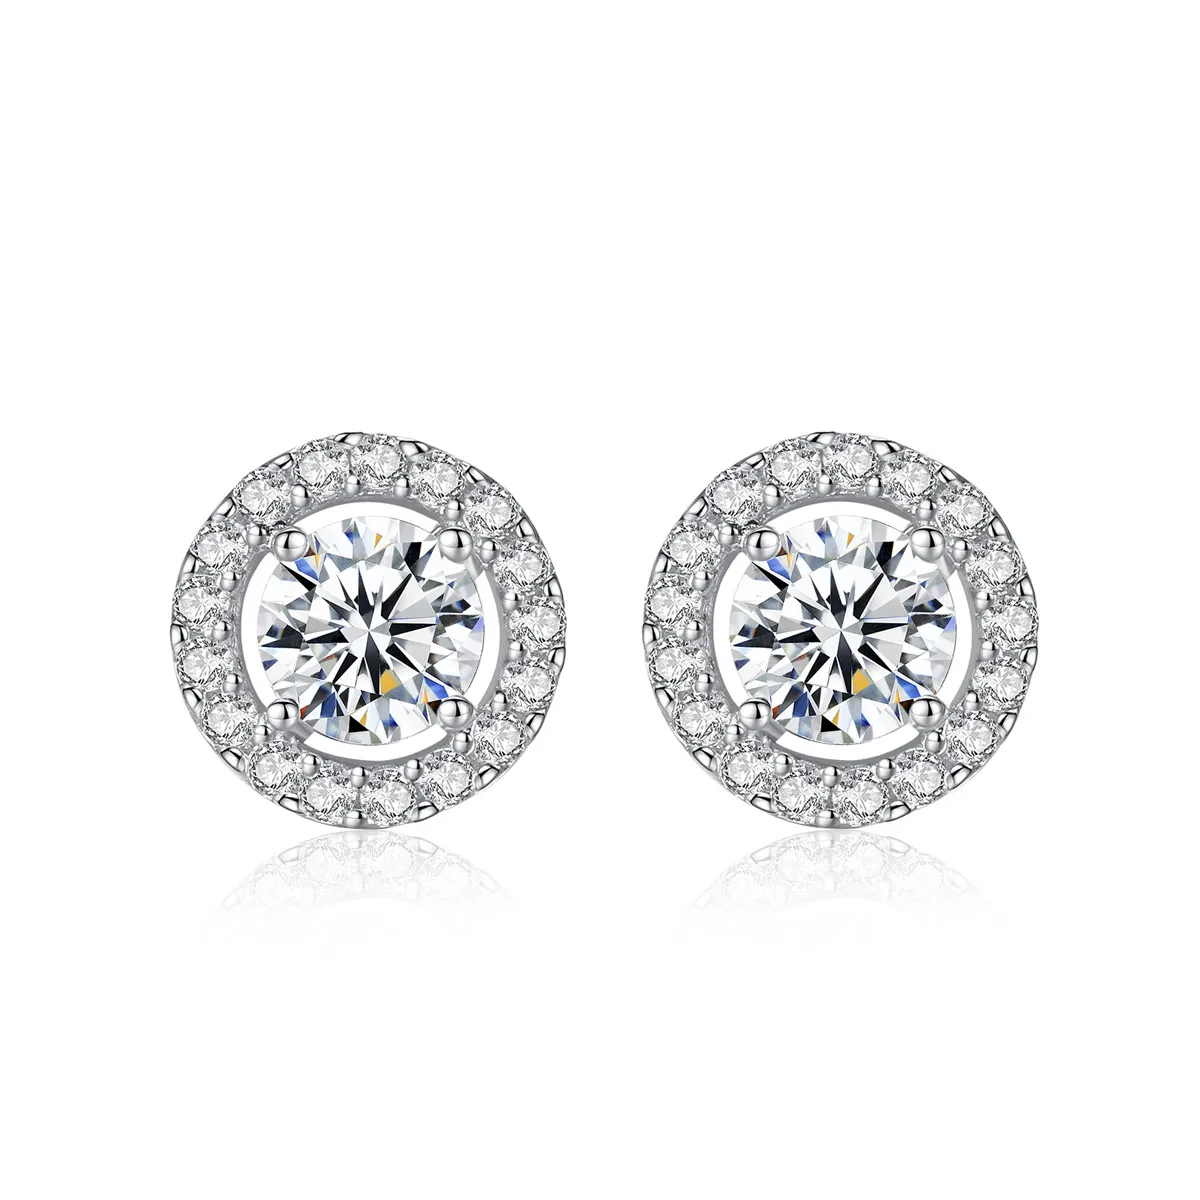 S925 Silver Stud Earrings Classic Micro Set Zircon Super Sparkling Earrings Europe Fashion Women Exquisite Earrings Wedding Party Jewelry Valentine's Day Gift SPC